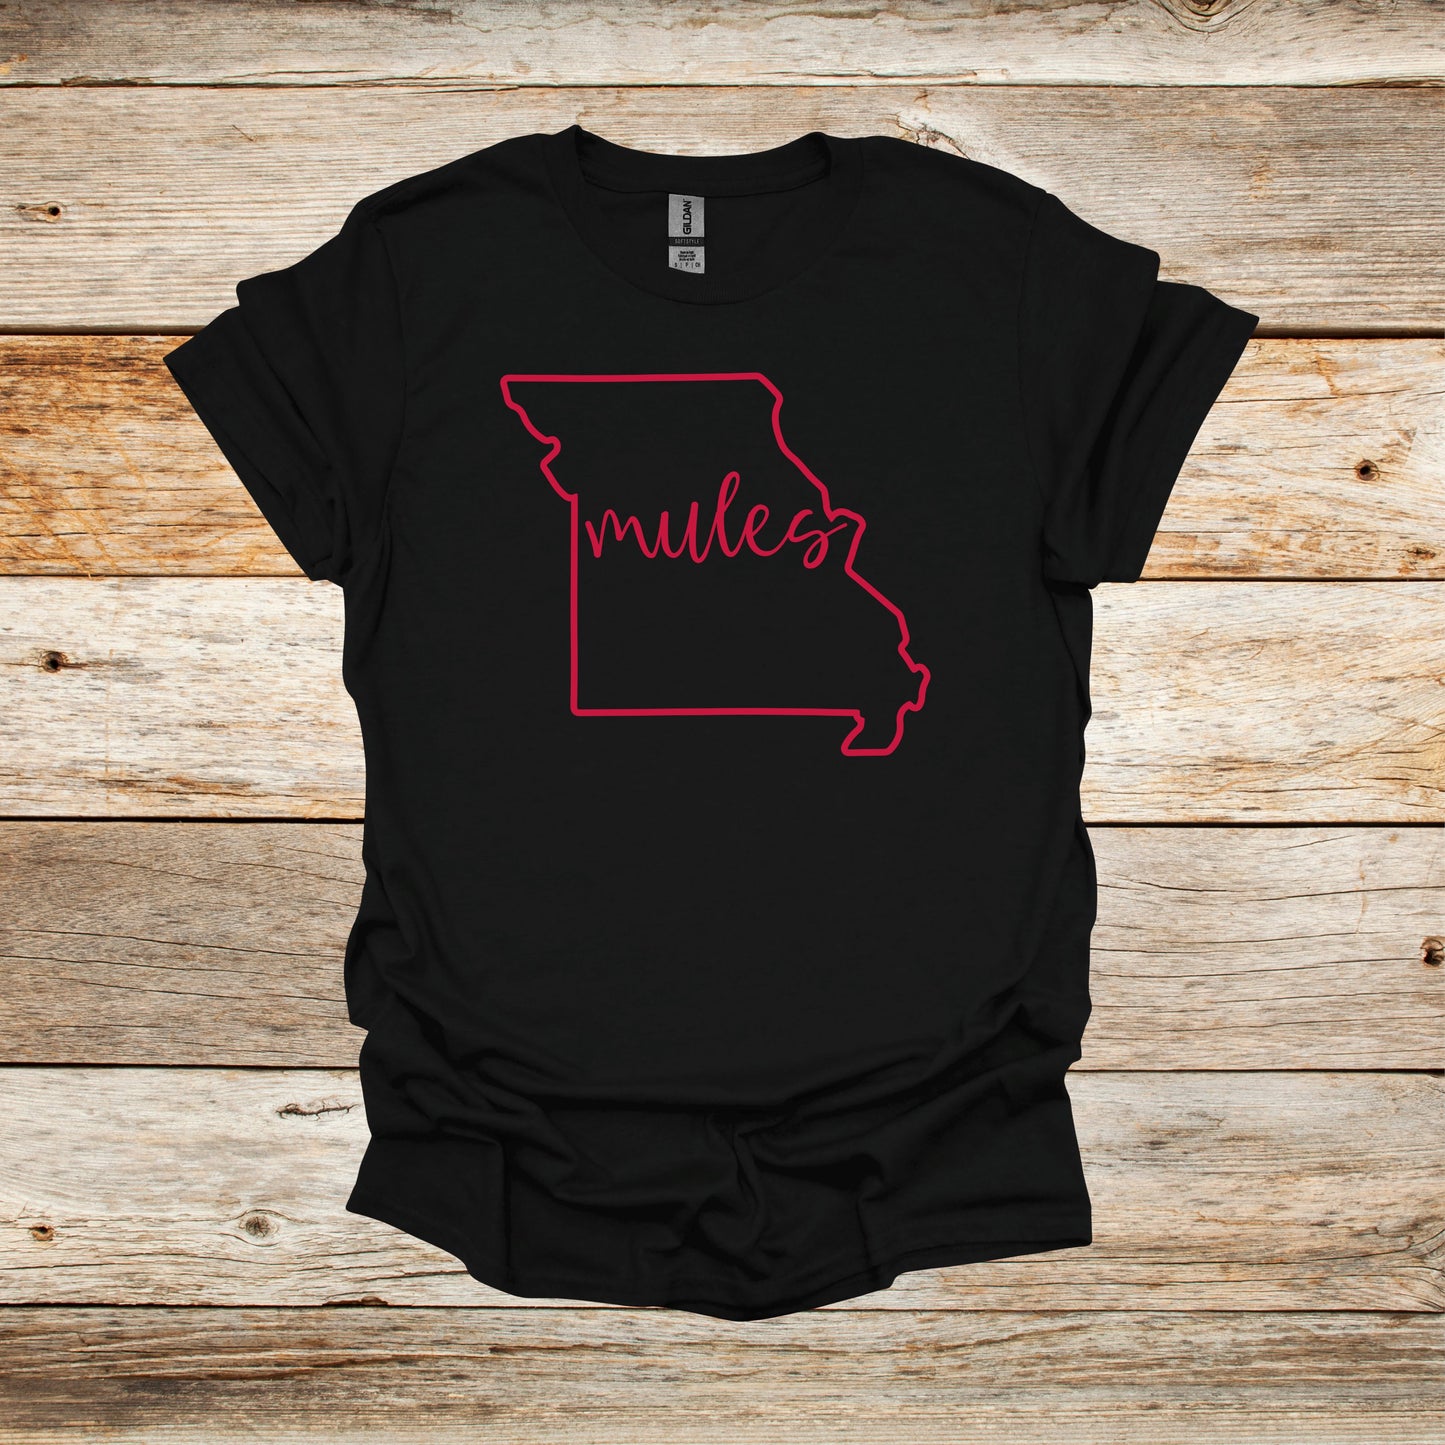 College T Shirt - University of Central Missouri Mules - State Outline - Adult and Children's Tee Shirts T-Shirts Graphic Avenue Black Adult Small 